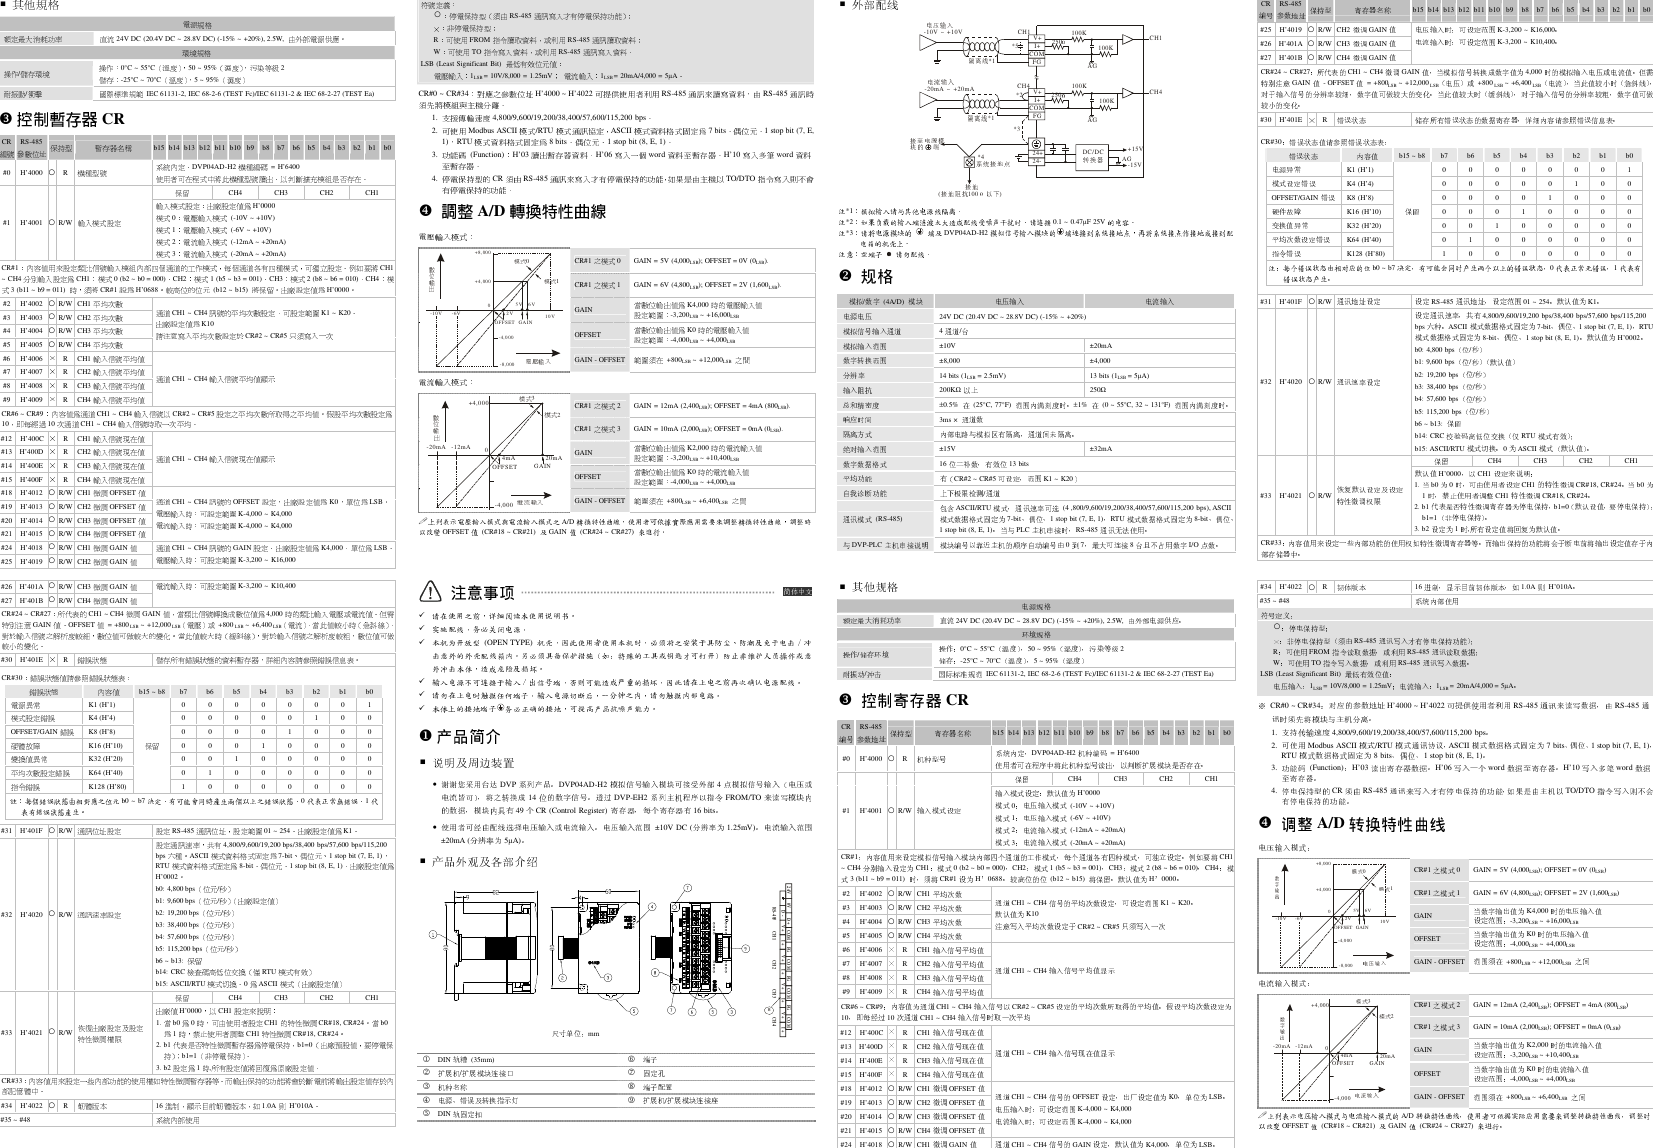 Page 2 of 2 - Delta-Electronics Delta-Electronics-Programmable-Logic-Controller-Dvp04Ad-H2-Users-Manual- 5011675601-AD01  Delta-electronics-programmable-logic-controller-dvp04ad-h2-users-manual